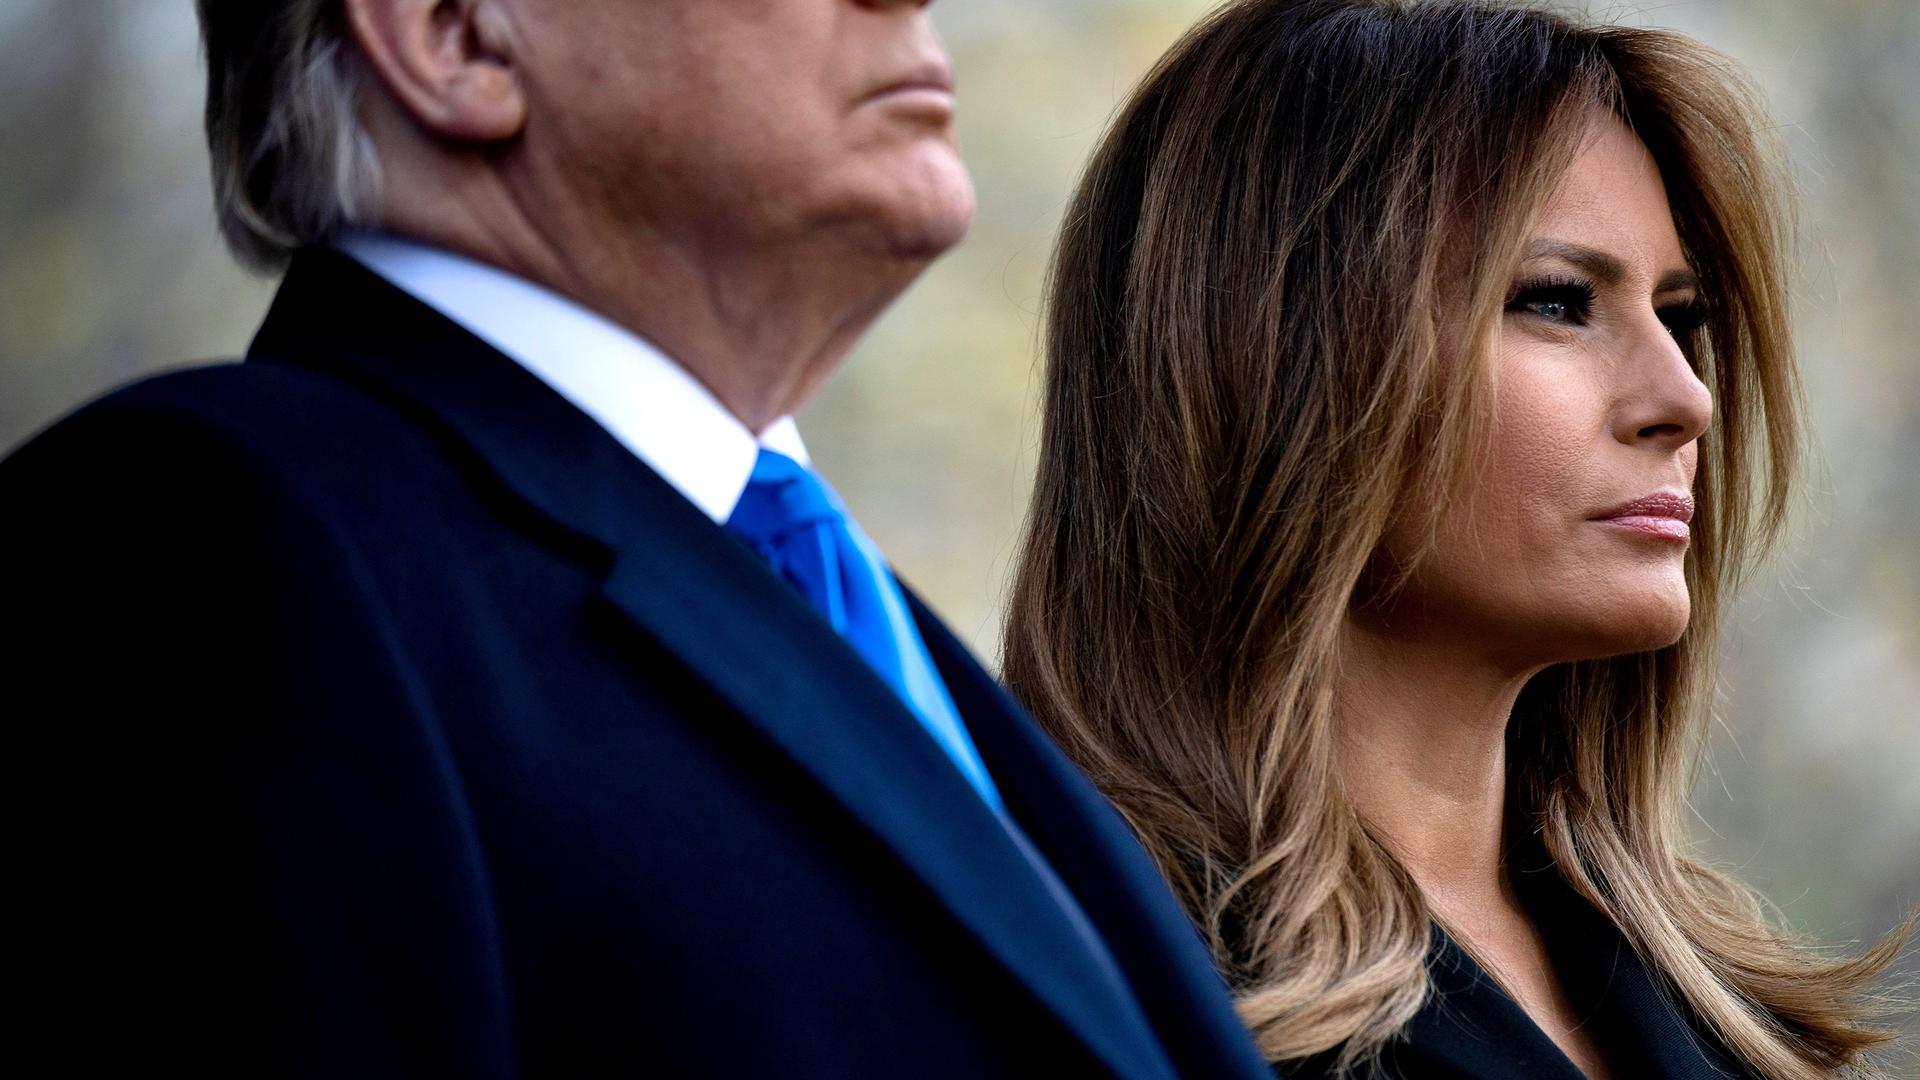 (FILES) In this file photo taken on November 11, 2019, US President Donald Trump and US First Lady Melania Trump listen to Taps during a Veterans Day event at Madison Square Park in New York. - Melania Trump on December 4, 2019, publicly rebuked Constitutional law professor Pamela Karlan,who used her 13-year-old son's name to make a point during an impeachment hearing against the president. Karlan invoked Barron Trump to demonstrate how the Constitution imposes distinctions between a monarch's power and that of a president. "The constitution says there can be no titles of nobility," Karlan told lawmakers, "So while the president can name his son 'Barron', he can't make him a baron." The pun led to chuckles in the congressional hearing room, but Melania Trump made clear it was no laughing matter. (Photo by Brendan Smialowski / AFP)